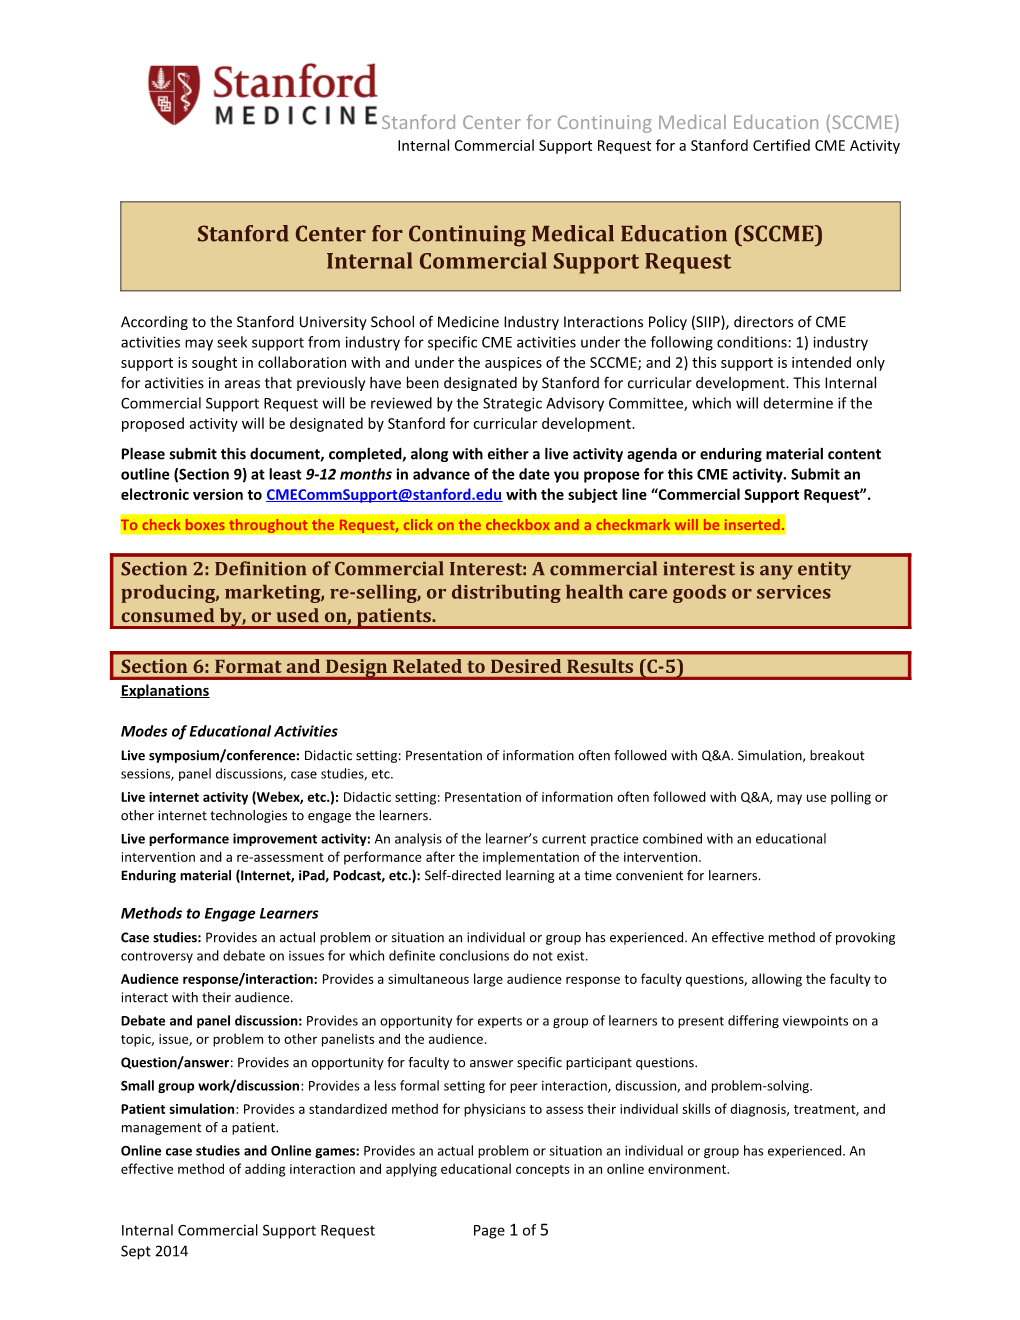 Stanford Center for Continuing Medical Education (SCCME)Internal Commercial Support Request